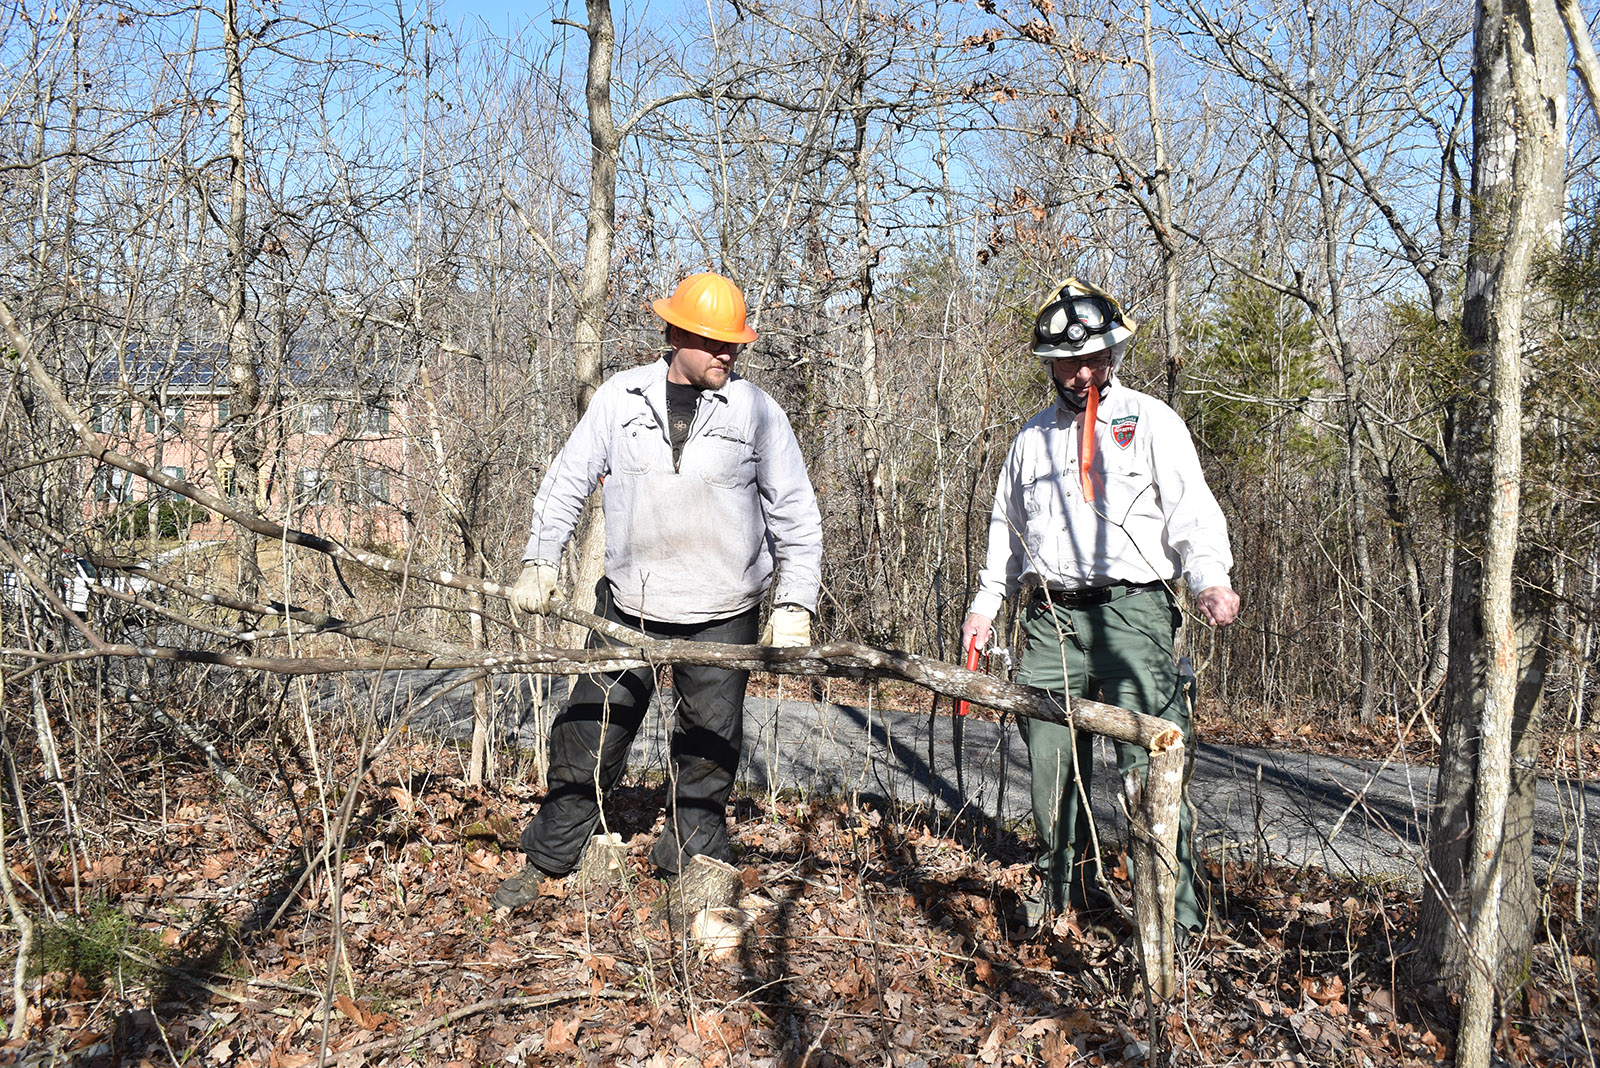 A photo of two men wearing hard hats amid trees, looking at a tree that has been partially cut and is fallen over.